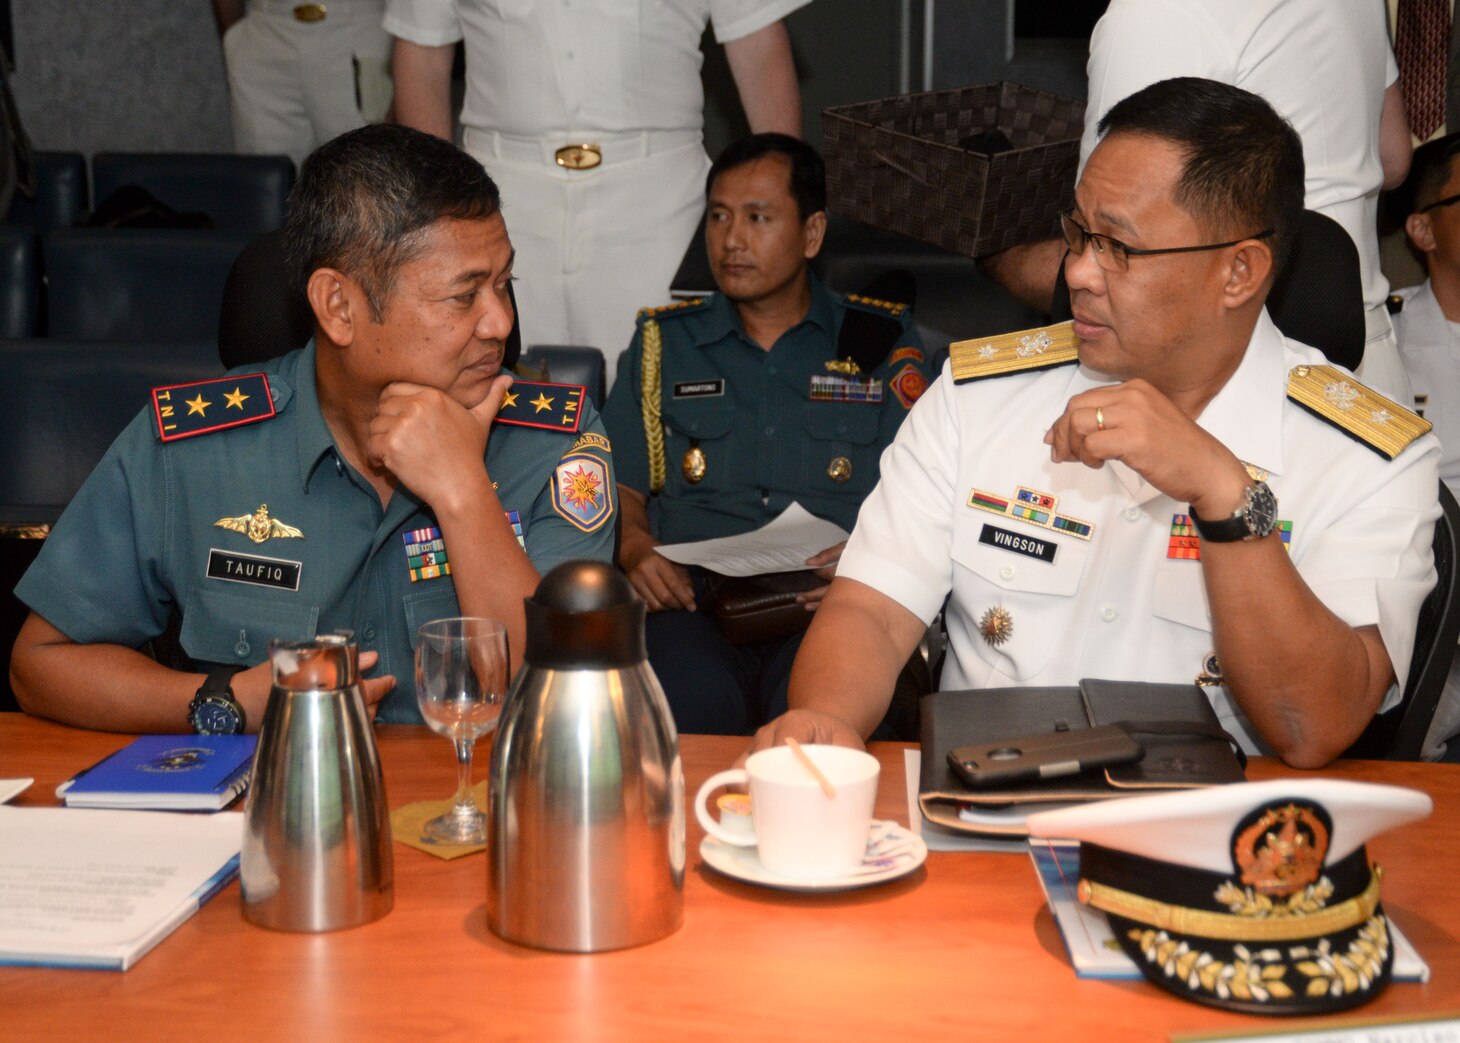 160319-N-CZ848-013 
CHANGI, Singapore (Mar. 19, 2016) – Rear Admiral Achmad Taufiqoerrochman, Western Fleet Commander, Tentara Nasional Indonesia-Angkatan Laut, left and Commodore Narciso Vingson, Deputy Commander, Philippine Fleet, speak during multilateral talks between the U.S., Republic of Singapore, Tentara Nasional Indonesia-Angkatan Laut, Royal Malaysian and Philippine navies aboard USS Blue Ridge (LCC 19). The multilateral talks are being held to enhance cooperation and strengthen relationships to best provide security and stability in the Indo-Asia Pacific. (U.S. Navy photo by Mass Communication Specialist 2nd Class Jason Kofonow/Released)